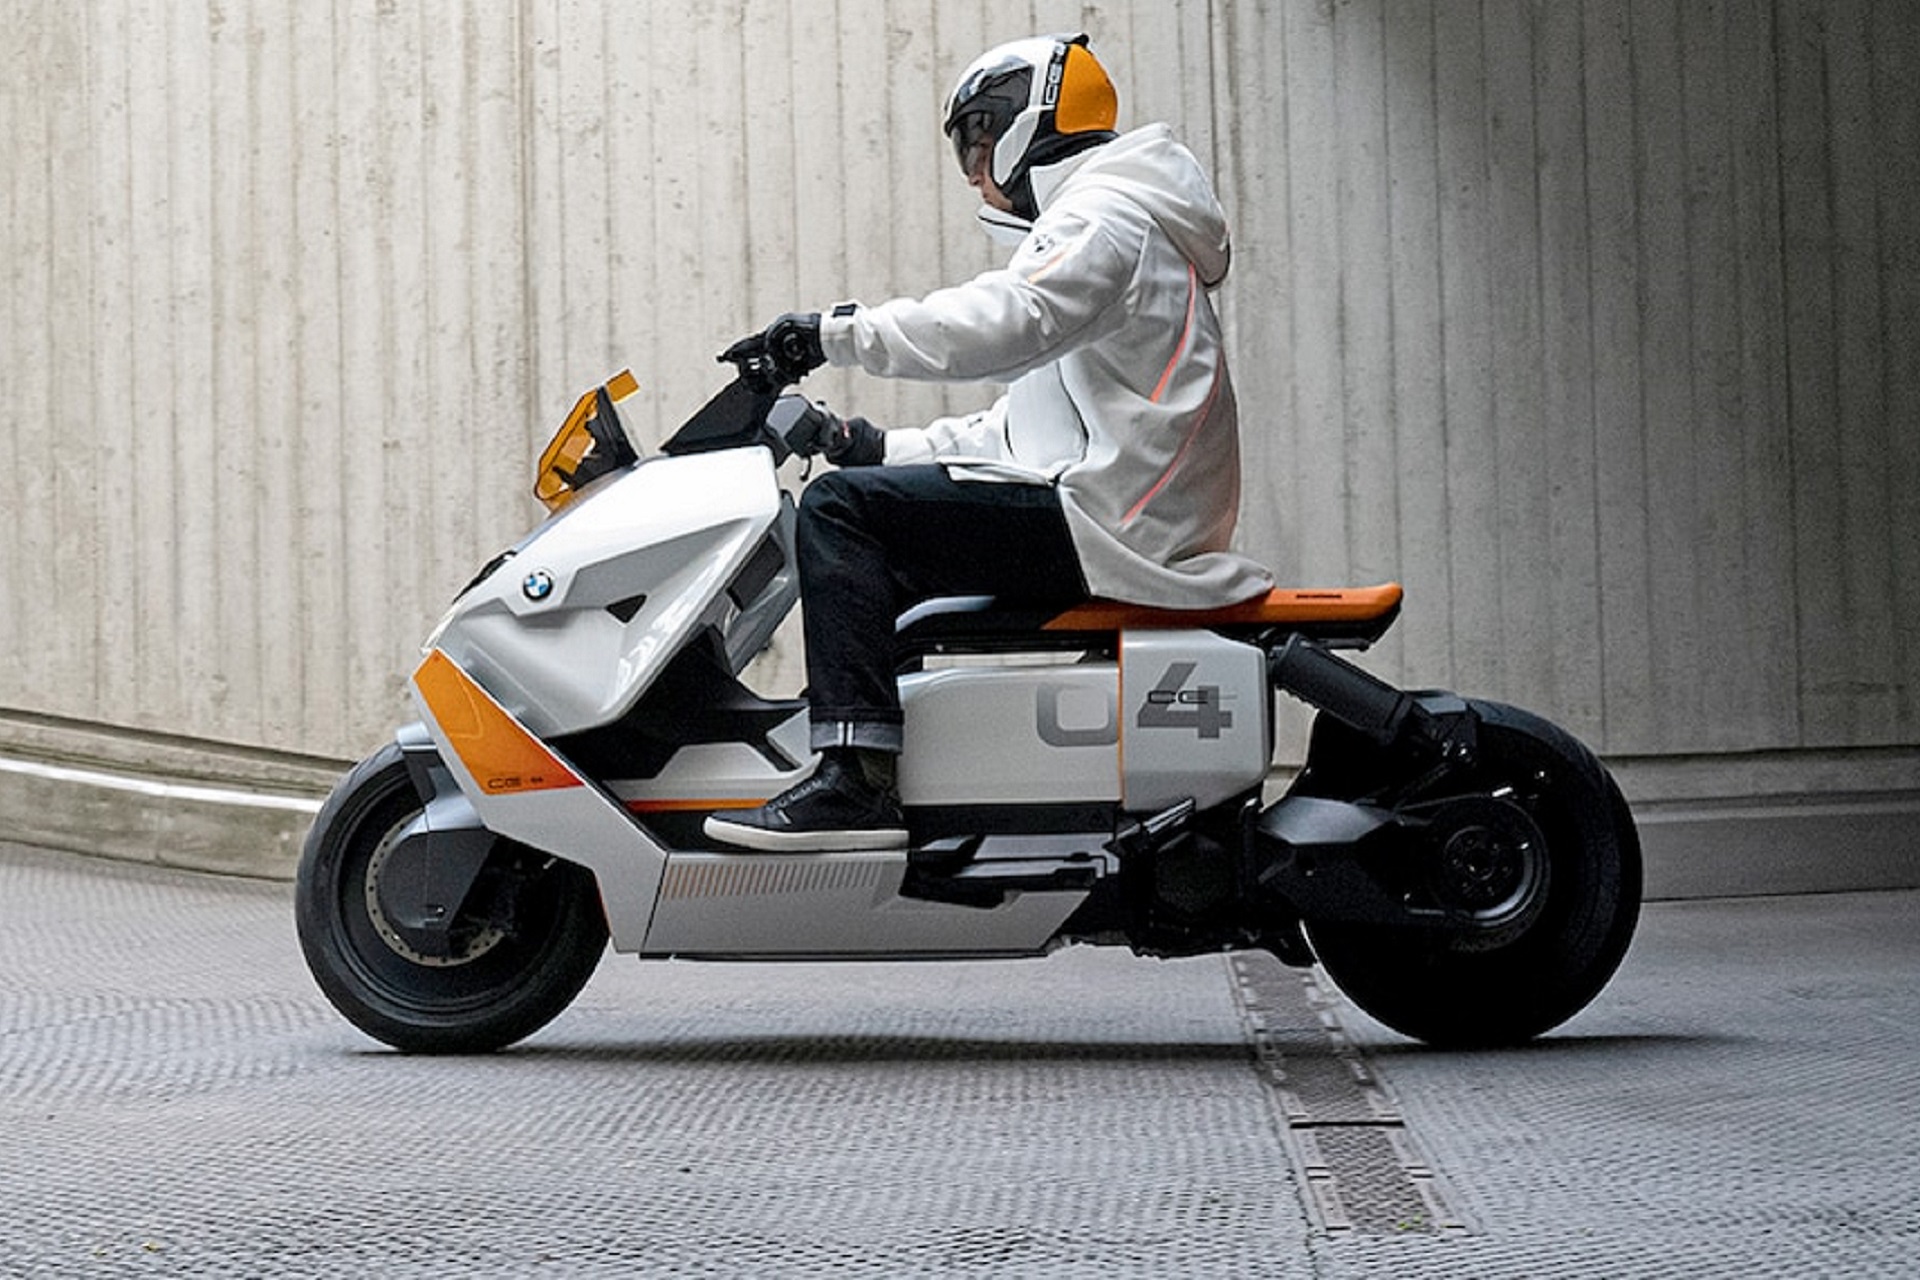 TVS, BMW To Jointly Make Electric Two-Wheeler In India